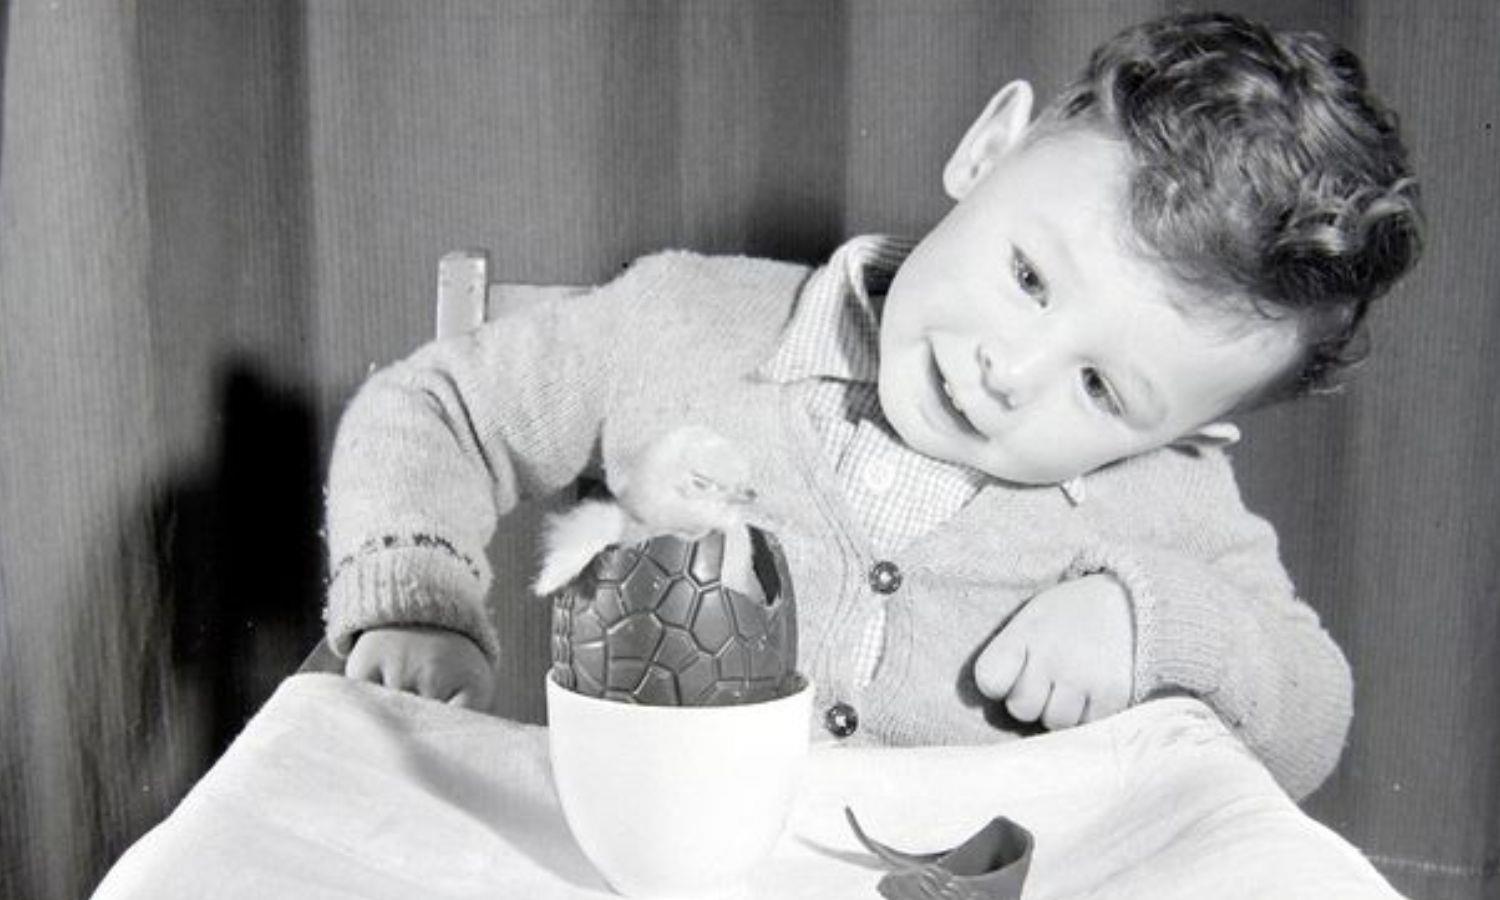 Child looking at chick in a chocolate egg